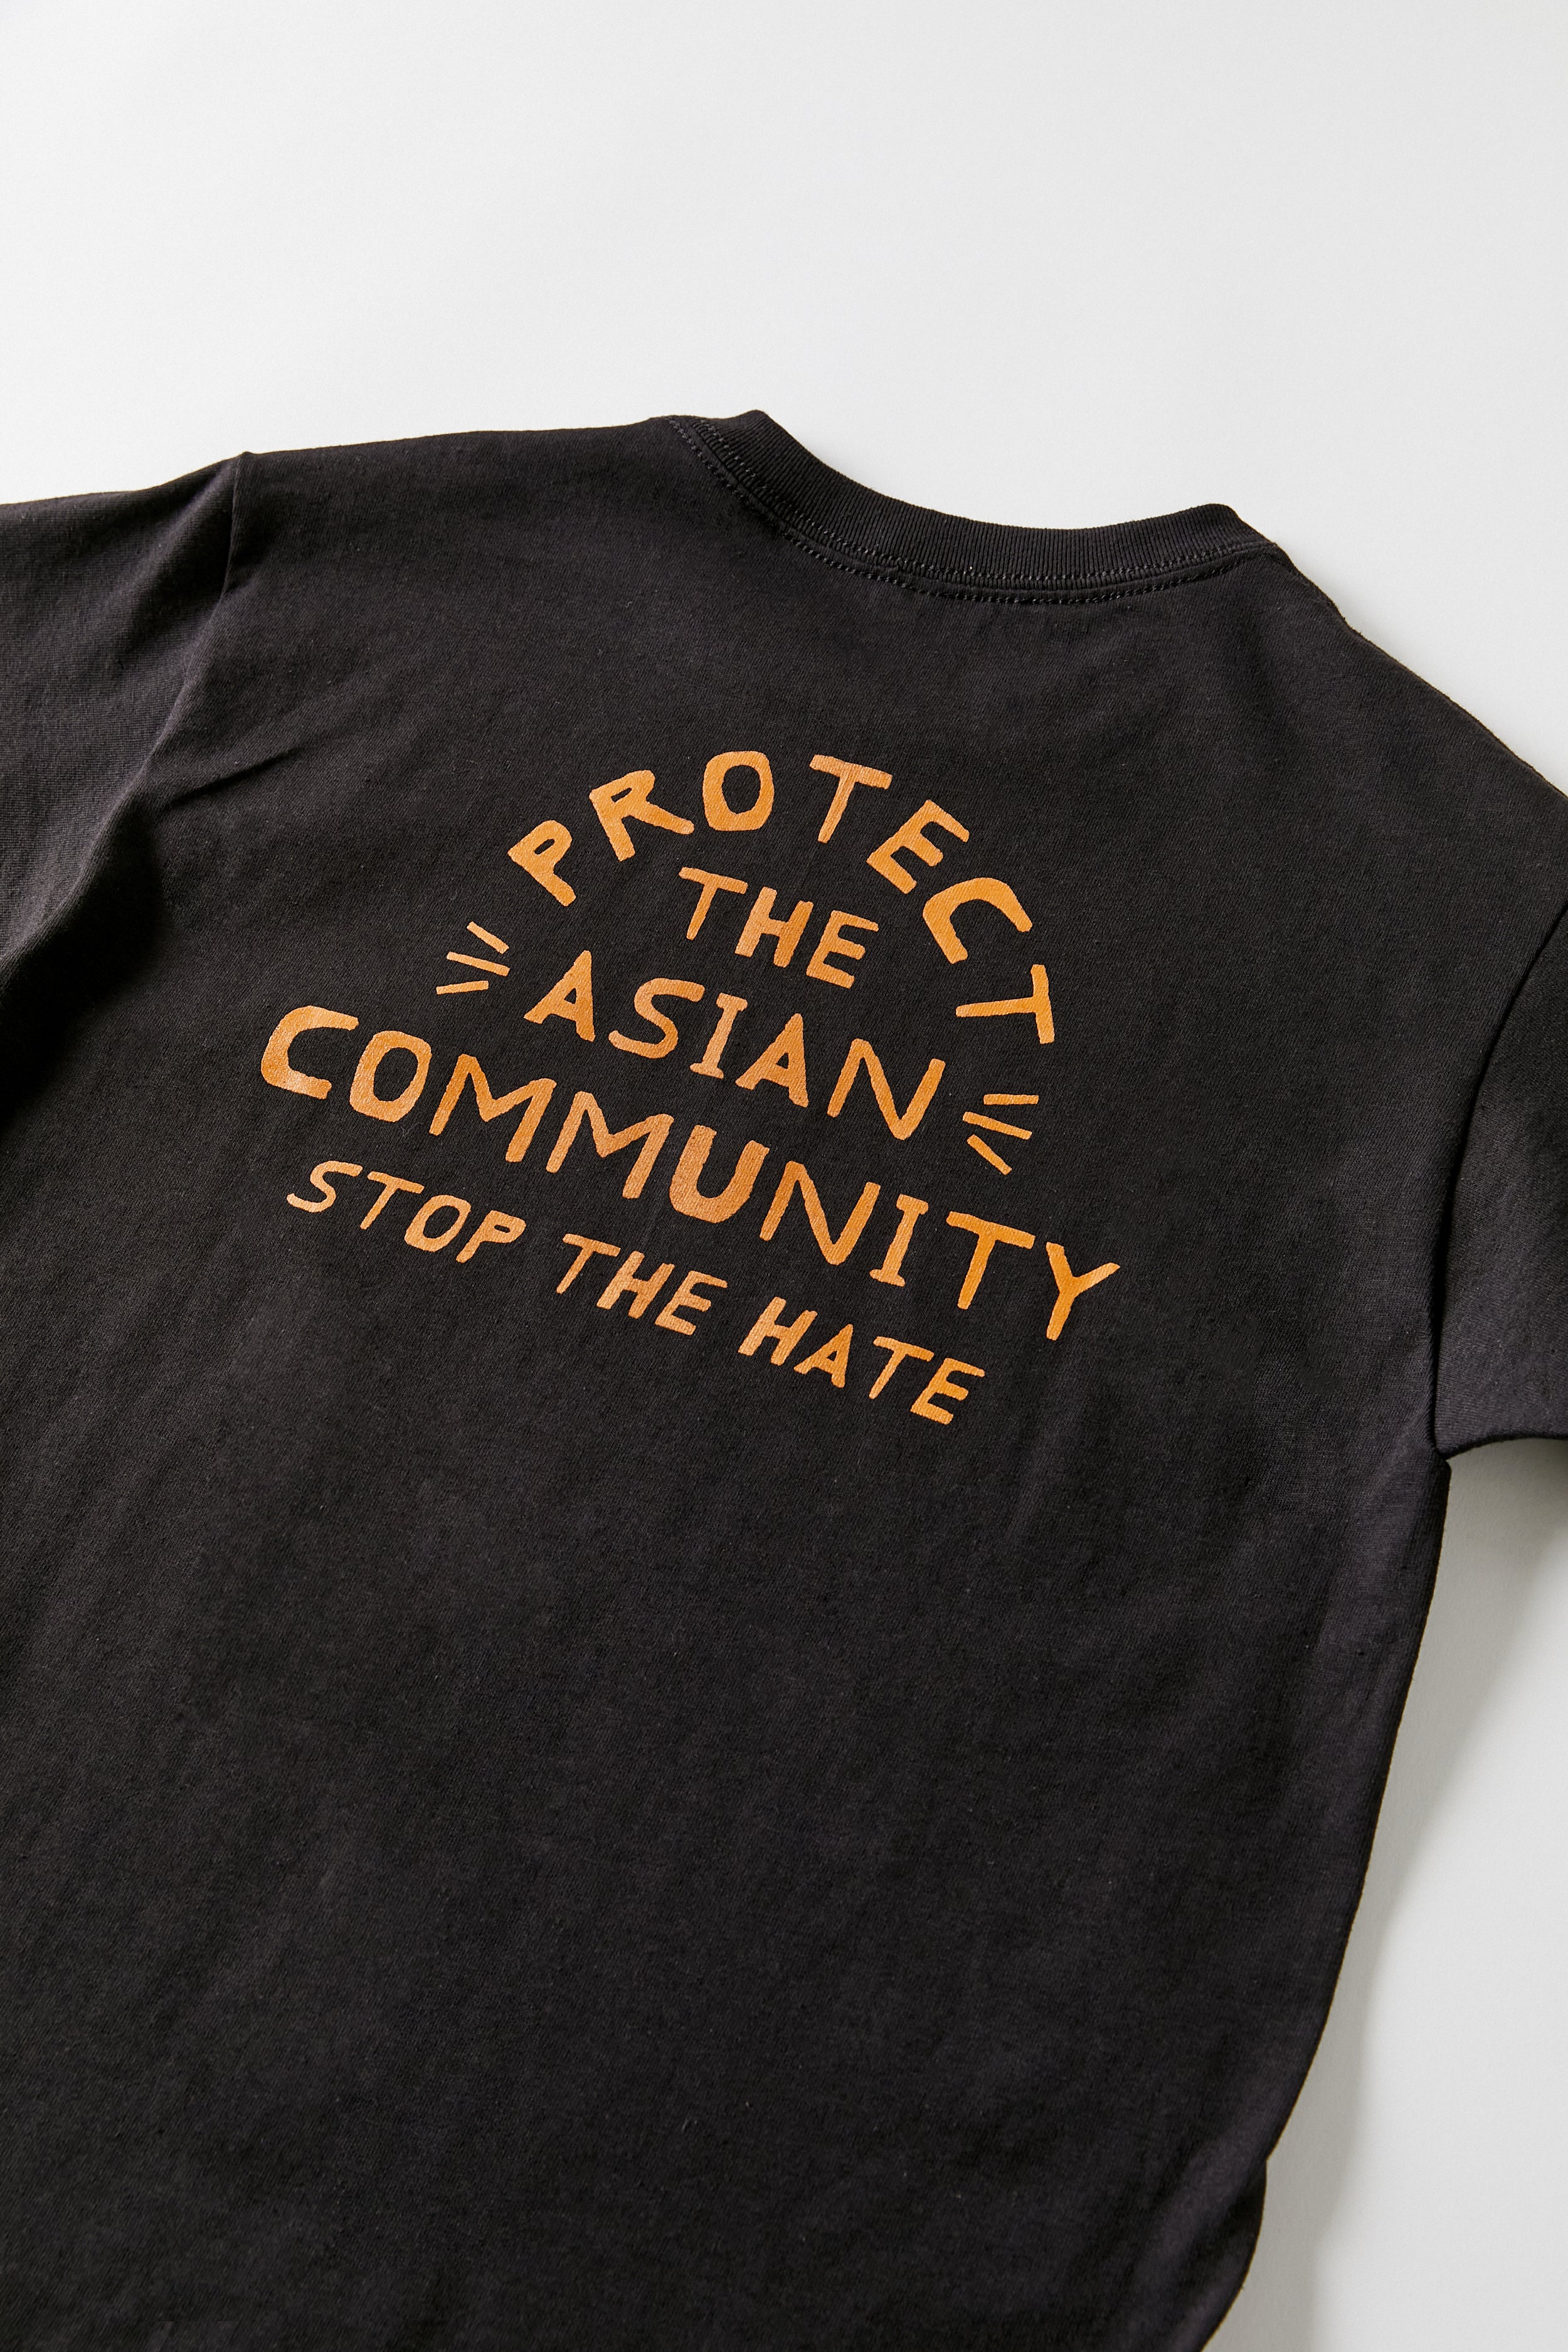 Stop the Hate T-Shirt Back Close up